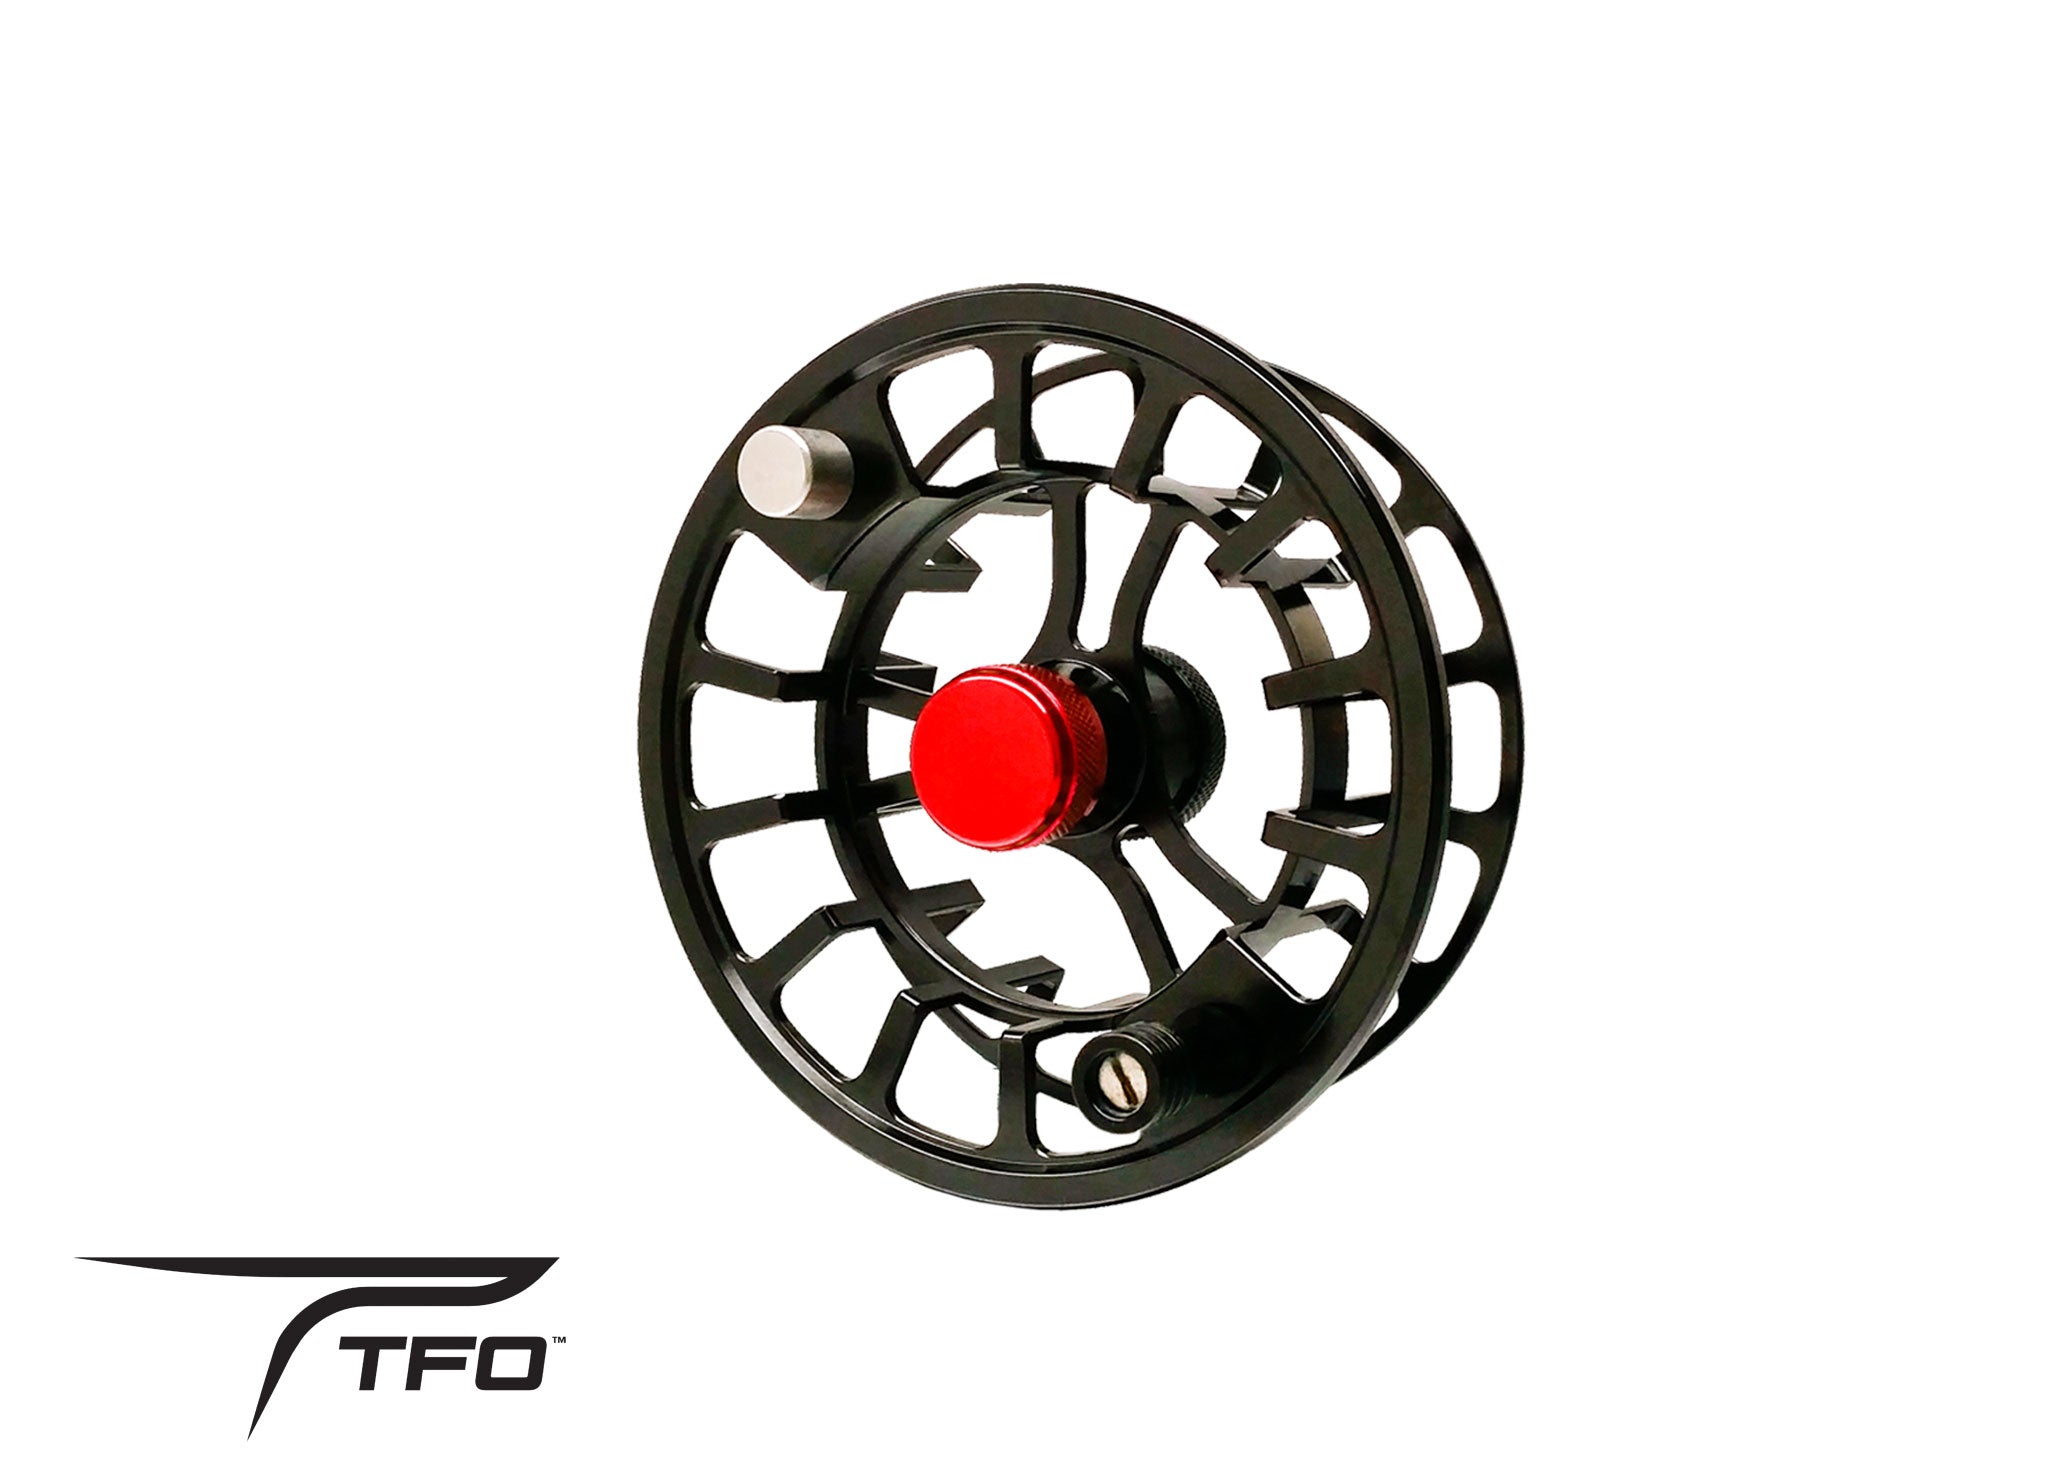 Nautilus X Fly Reels and Spools — The Flyfisher